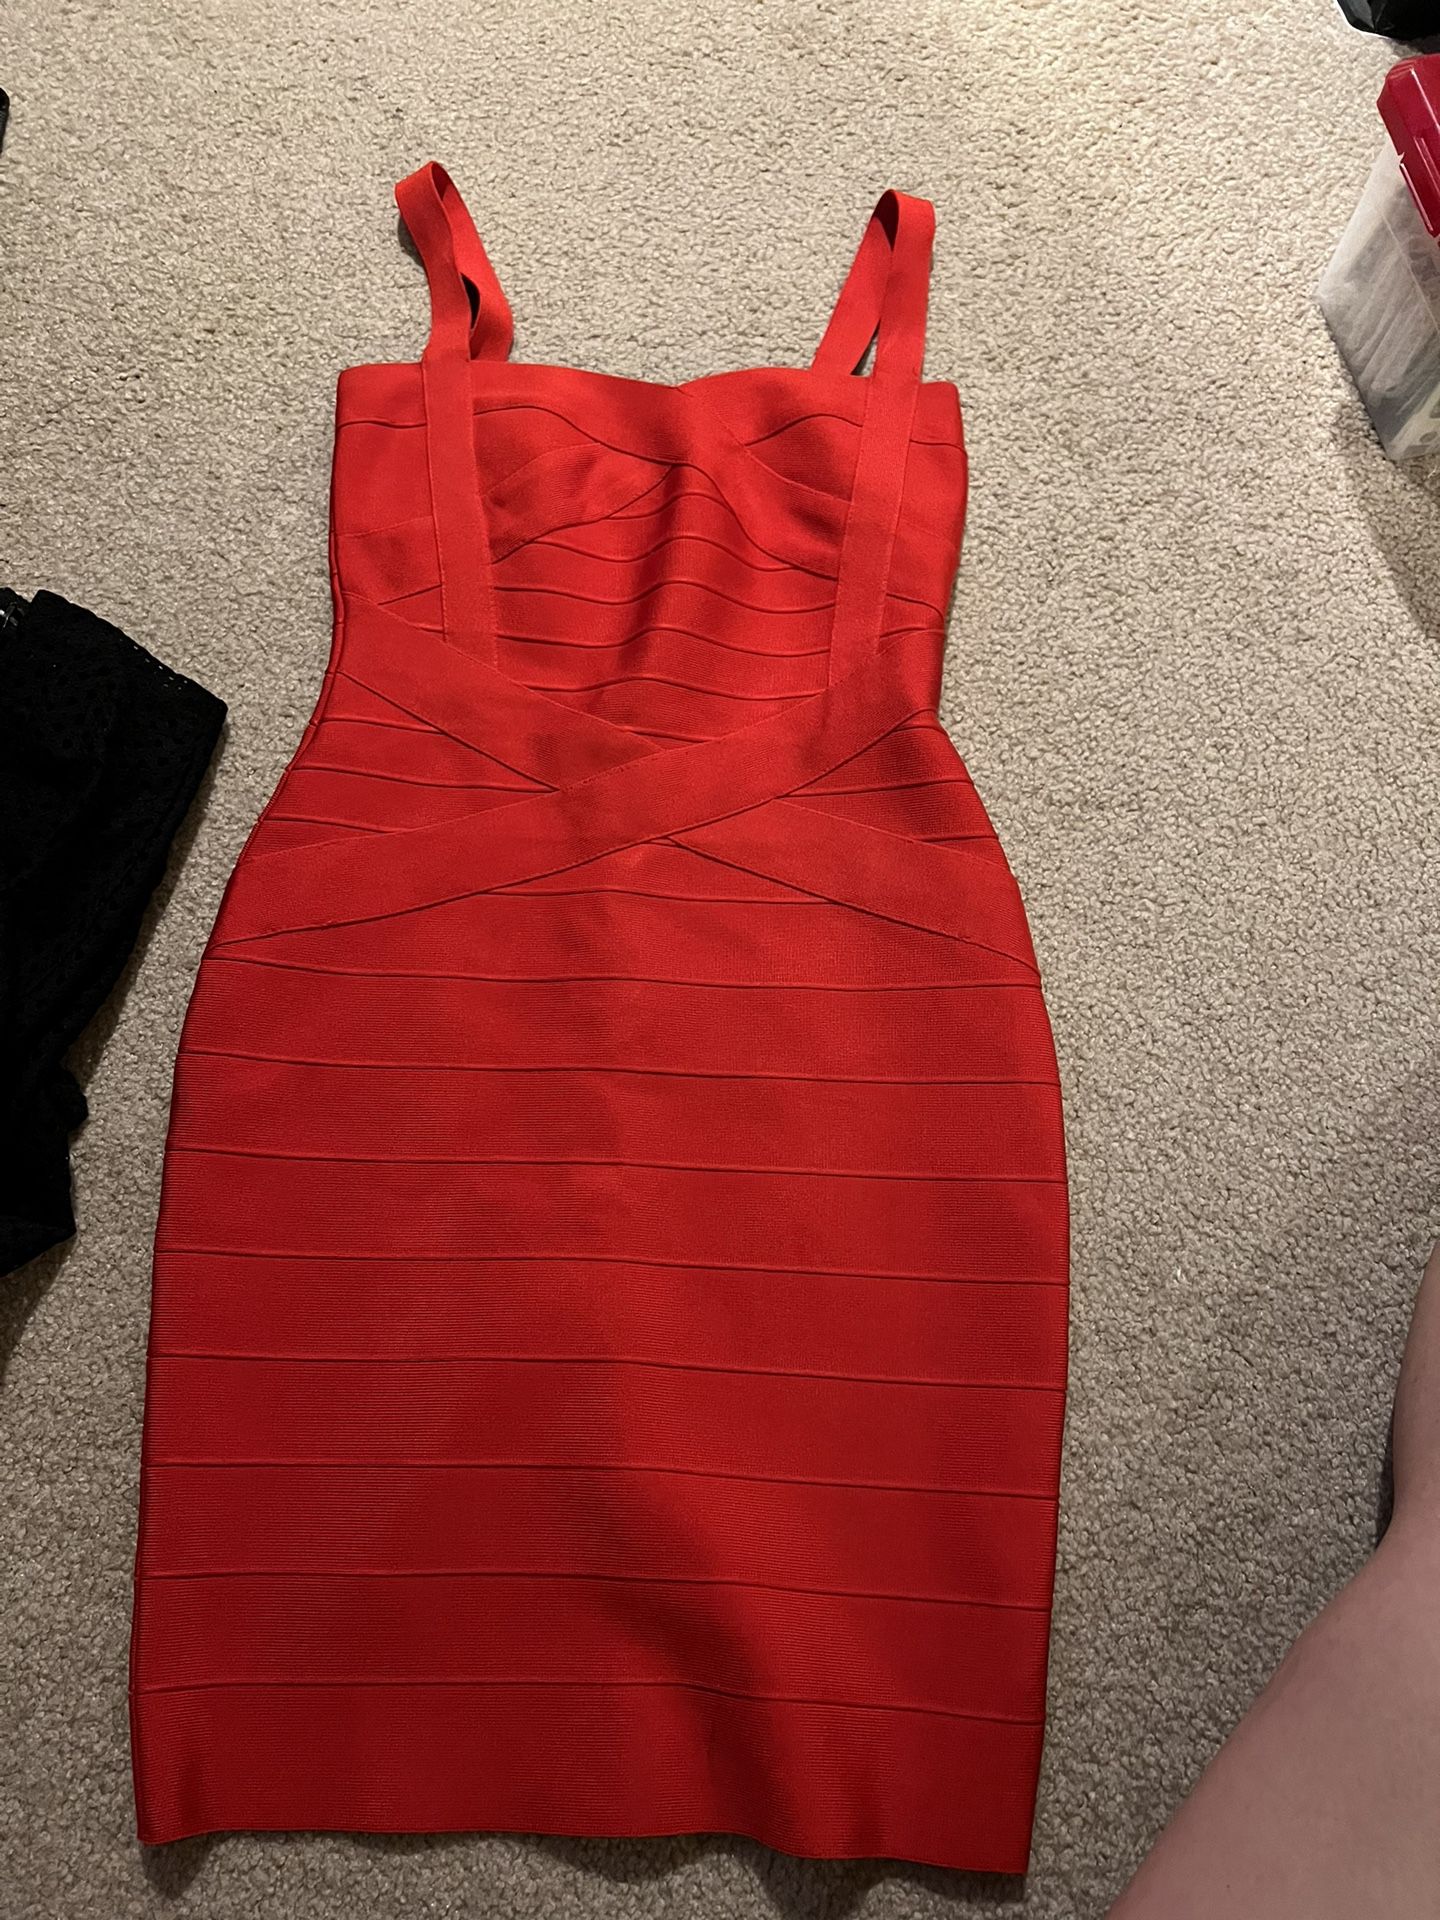 Red Dress Size S